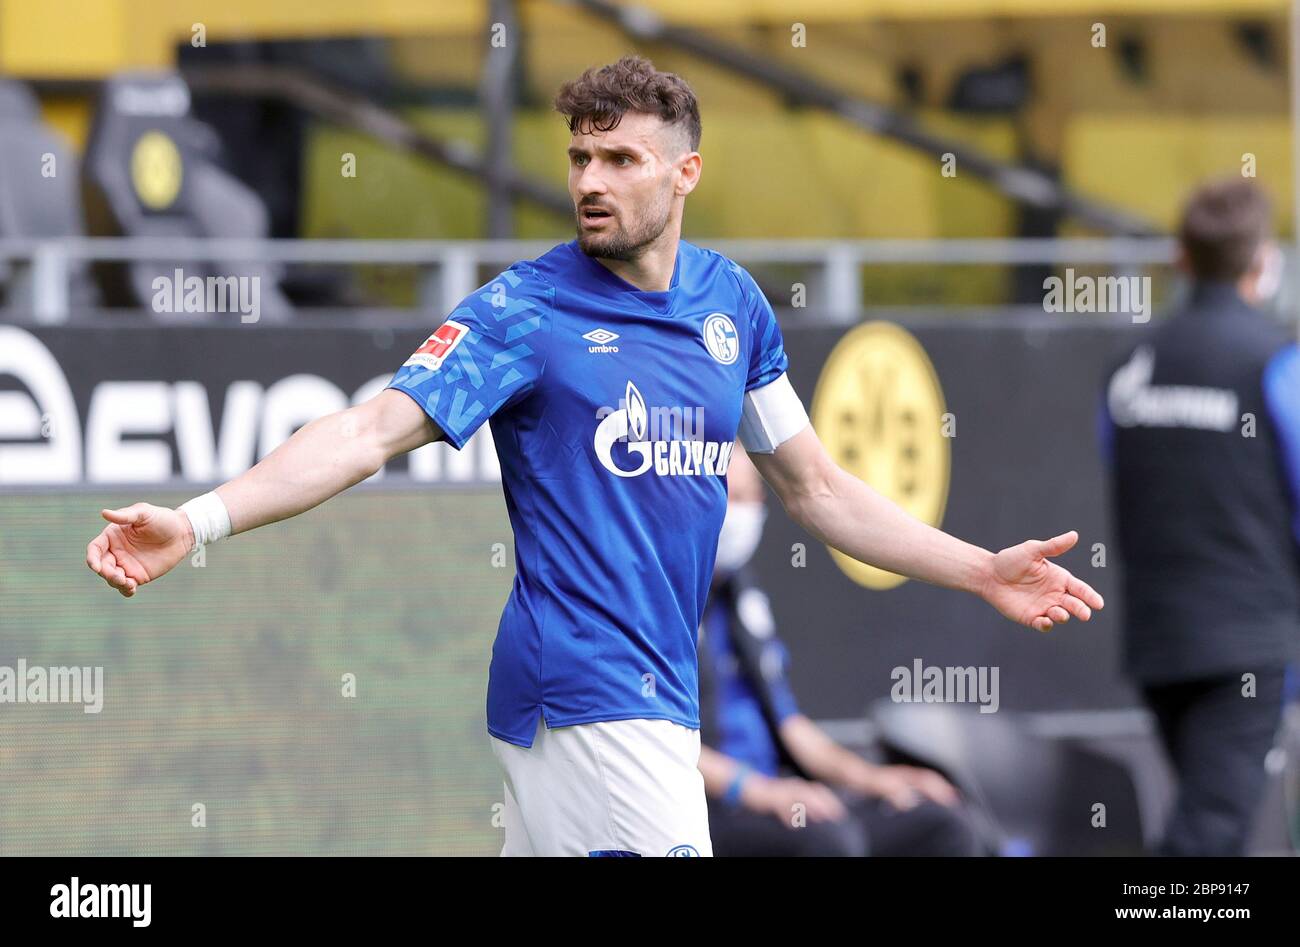 Daniel CALIGIURI (GE) disappointed, Soccer 1.Bundesliga, 26.matchday, Borussia Dortmund (DO) - FC Schalke 04 (GE), on May 16, 2020 in Dortmund/Germany. Photo: Ralf Ibing/firosportphoto/POOL via PHOTO AGENCY SVEN SIMON For journalistic purposes only! Only for editorial use! ## Gemvssvu the requirements of the DFL Deutsche Fuvuball Liga, it is prohibited to use or have in the stadium and/or photos taken from the game in the form of sequence pictures and/or video-like photo series. DFL regulations prohibit any use of photographs as image sequences and/or quasi-video. ## ¬ | usage worl Stock Photo